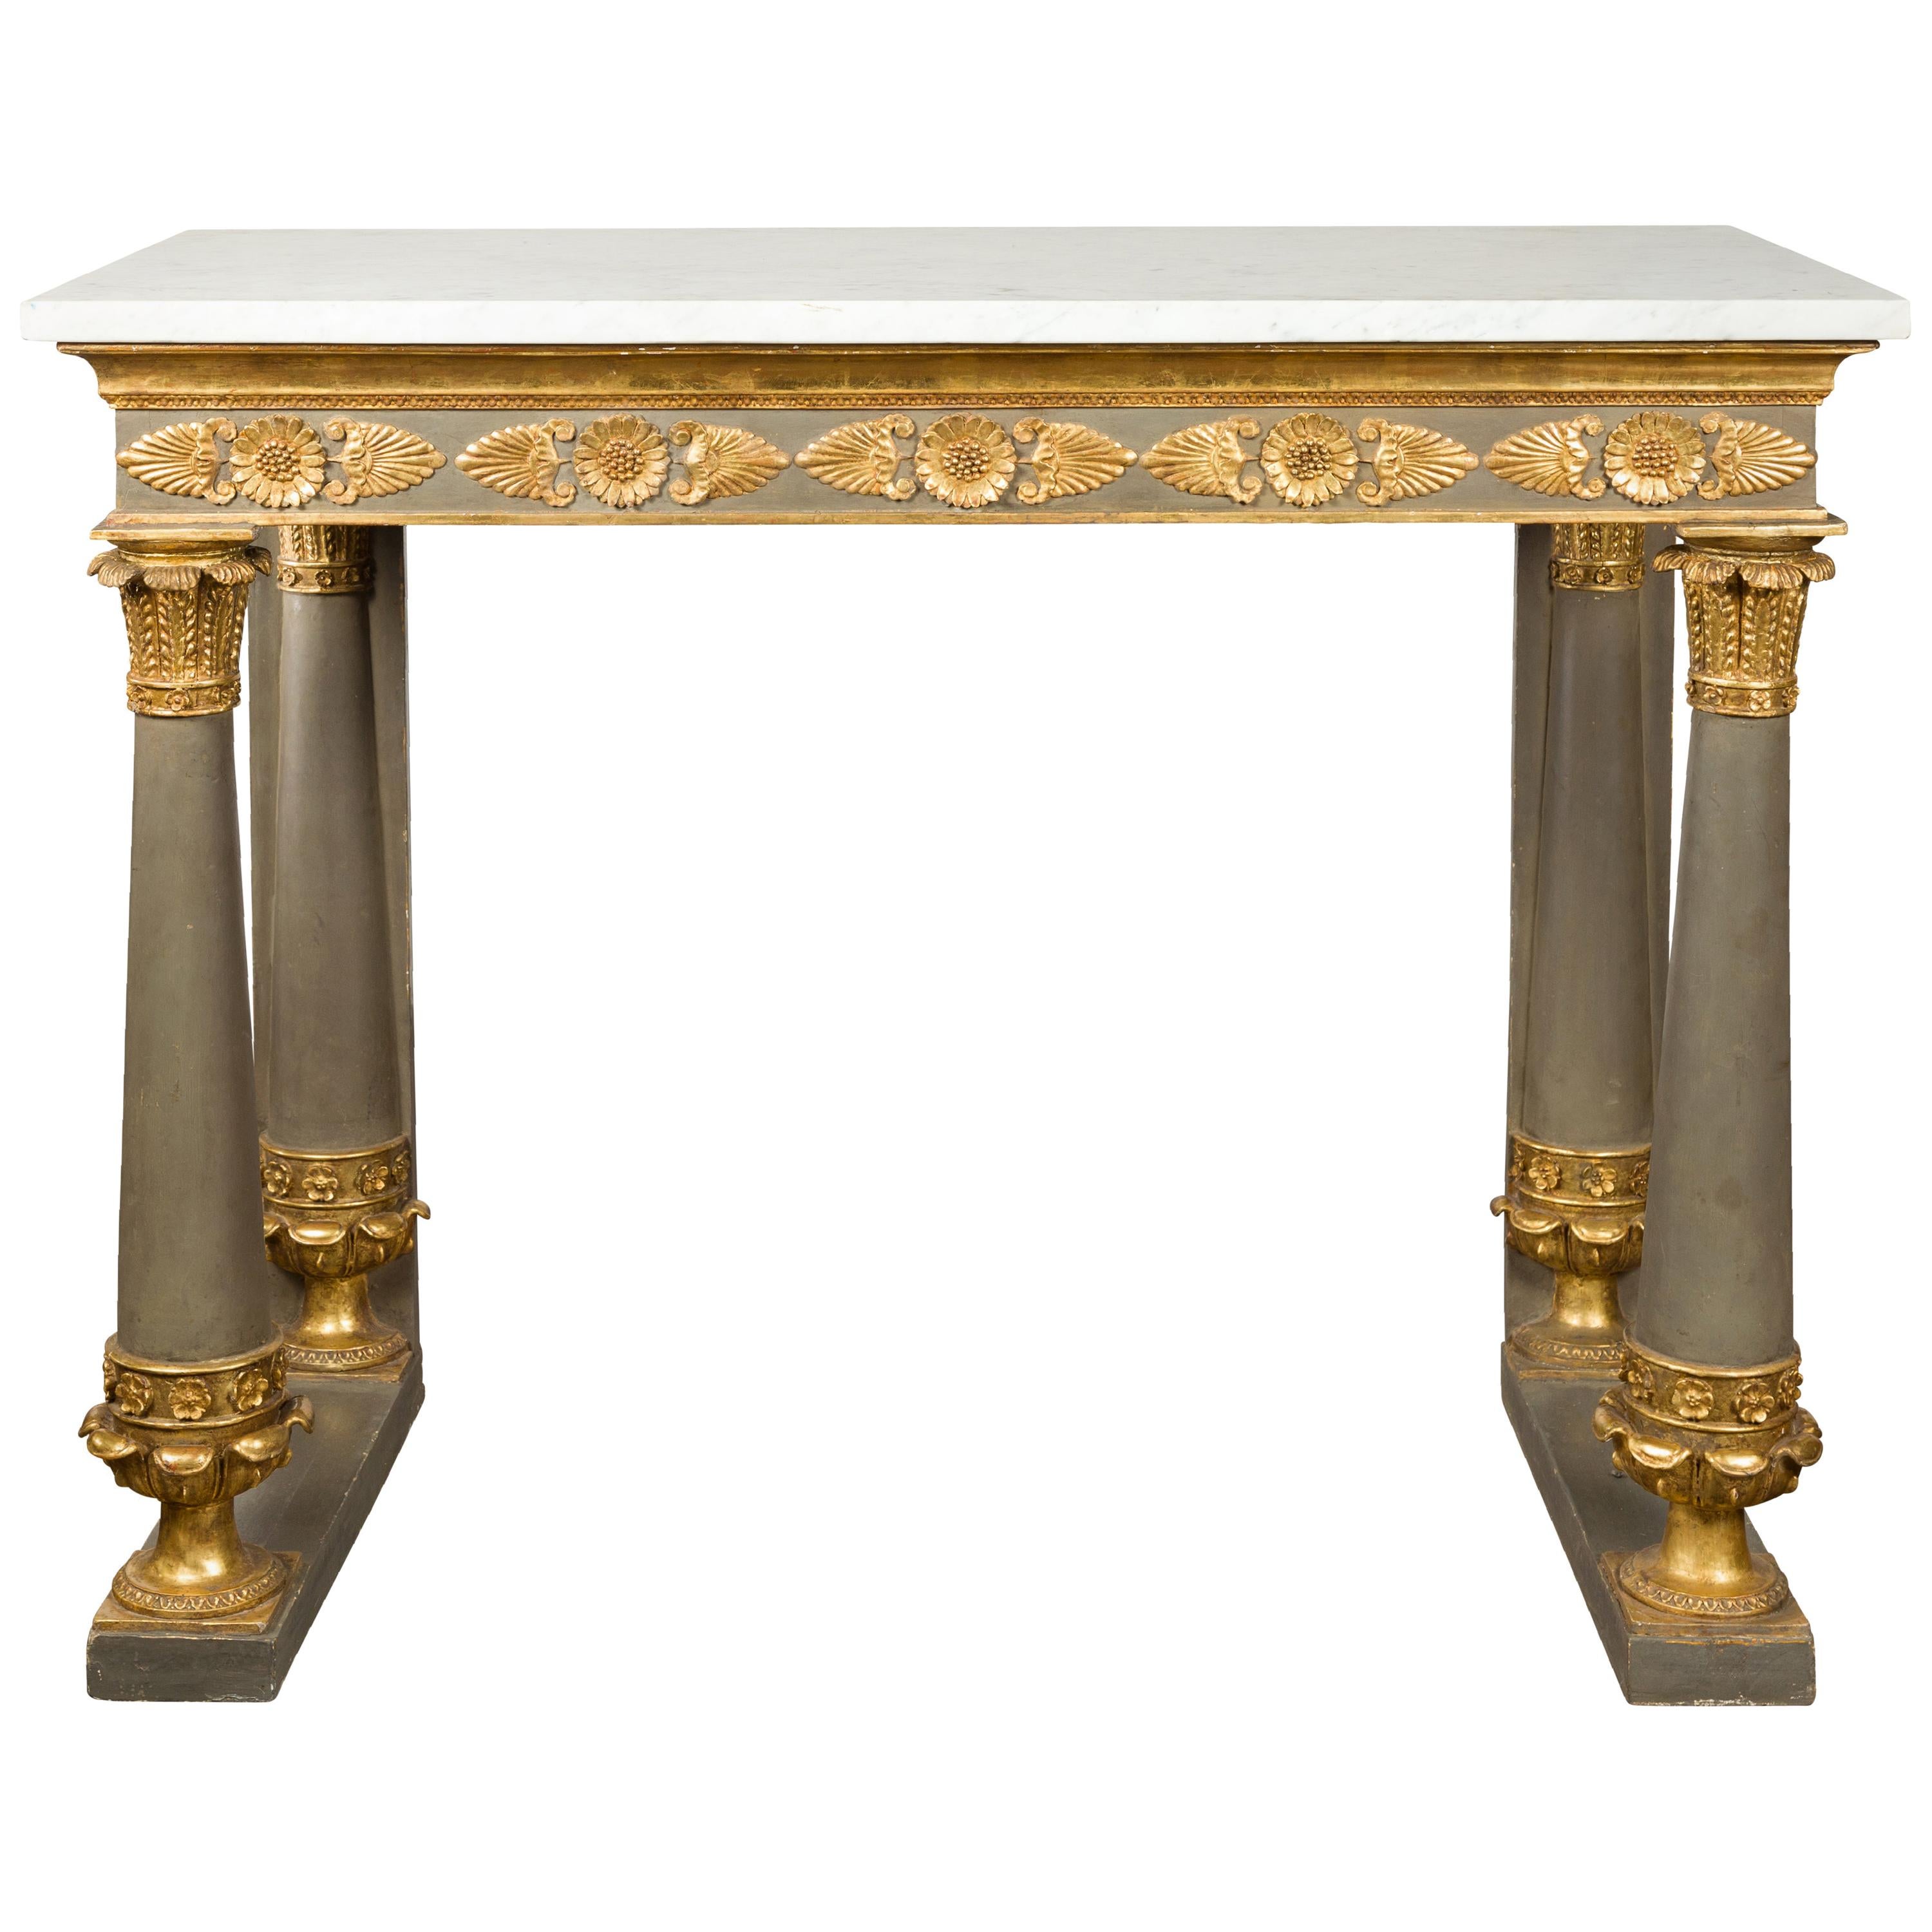 French 1830s Empire Console Table with White Marble Top and Carved Palmettes